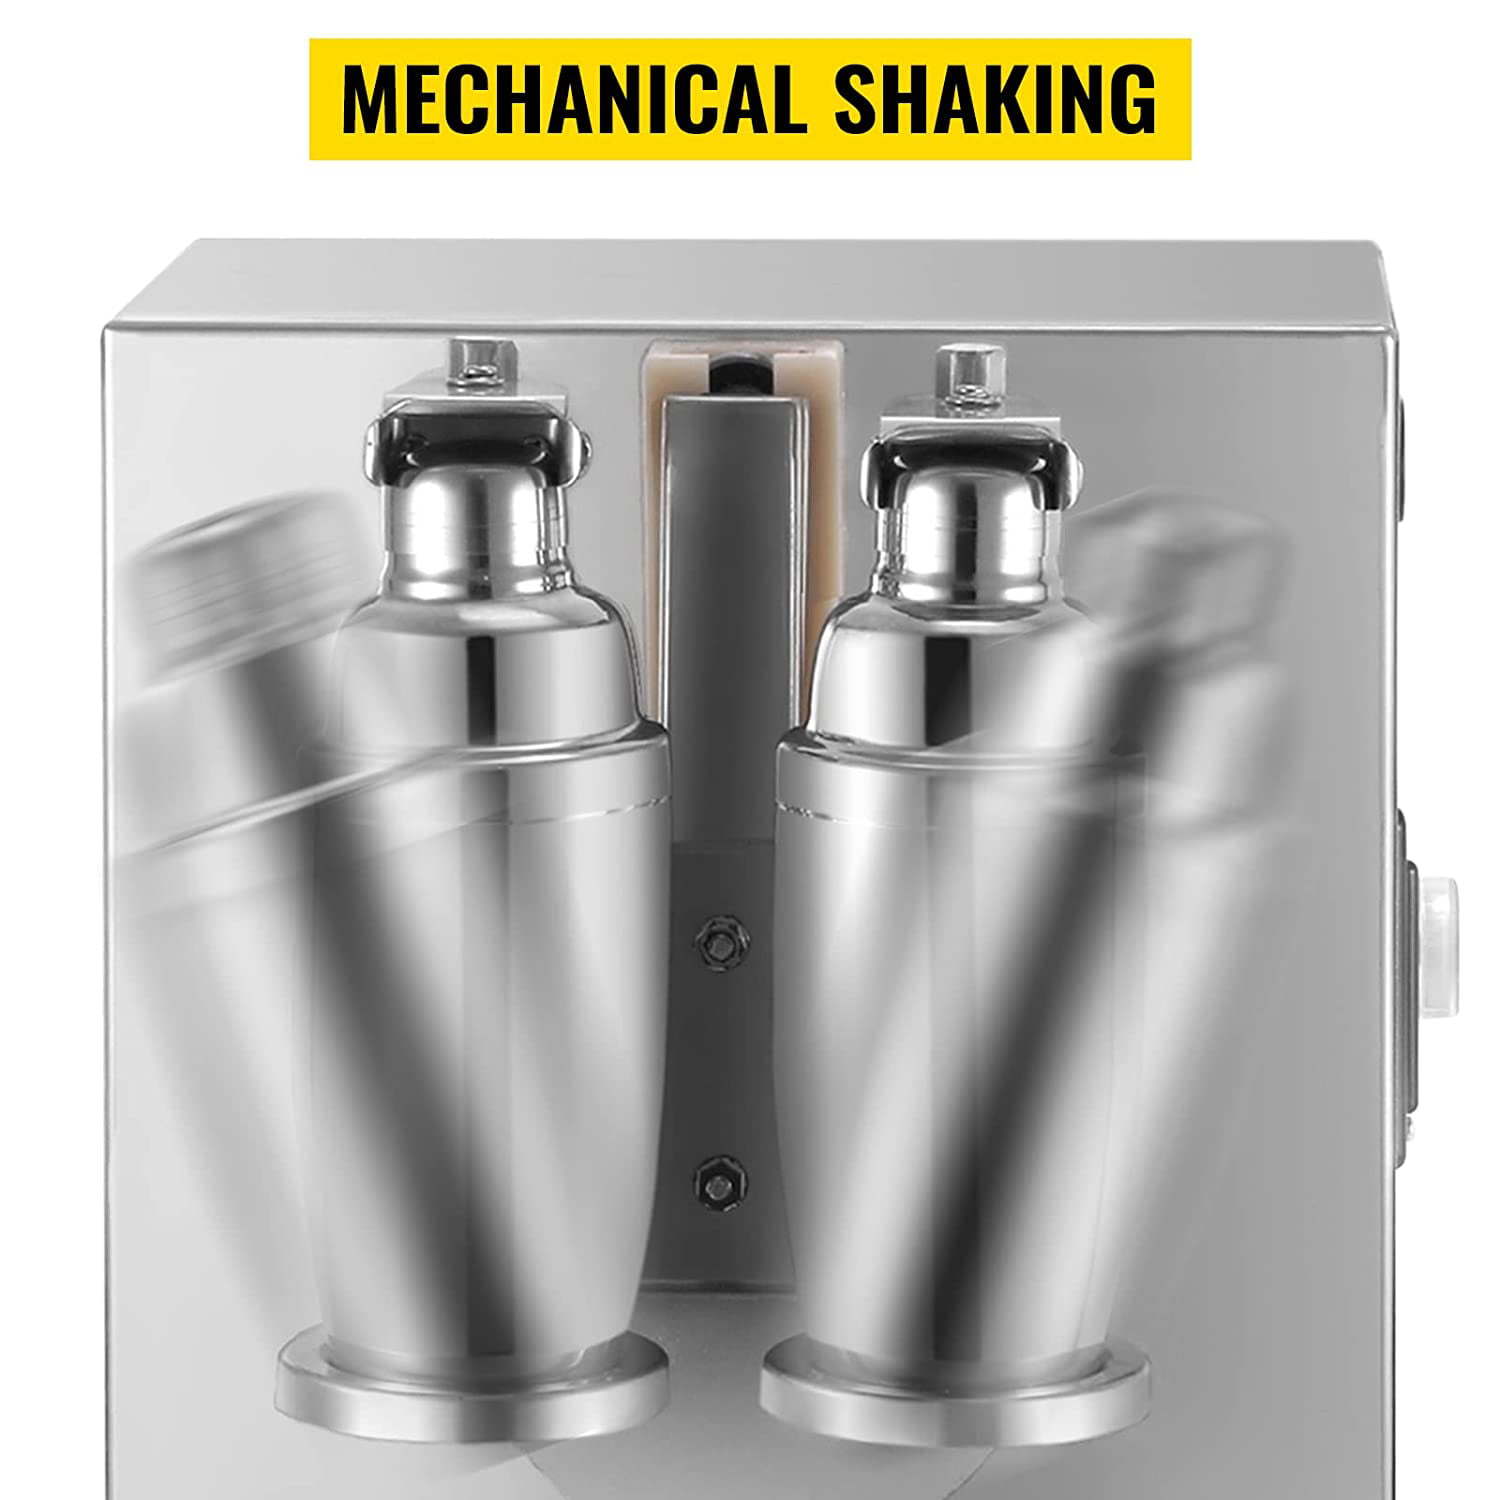 Commercial bubble tea shaking machine with two stainless steel shakers.
Product Name: 110V Electric Milk Tea Shaker Machine,120W Stainless Steel Double-Cup Shaker Machine, Silver